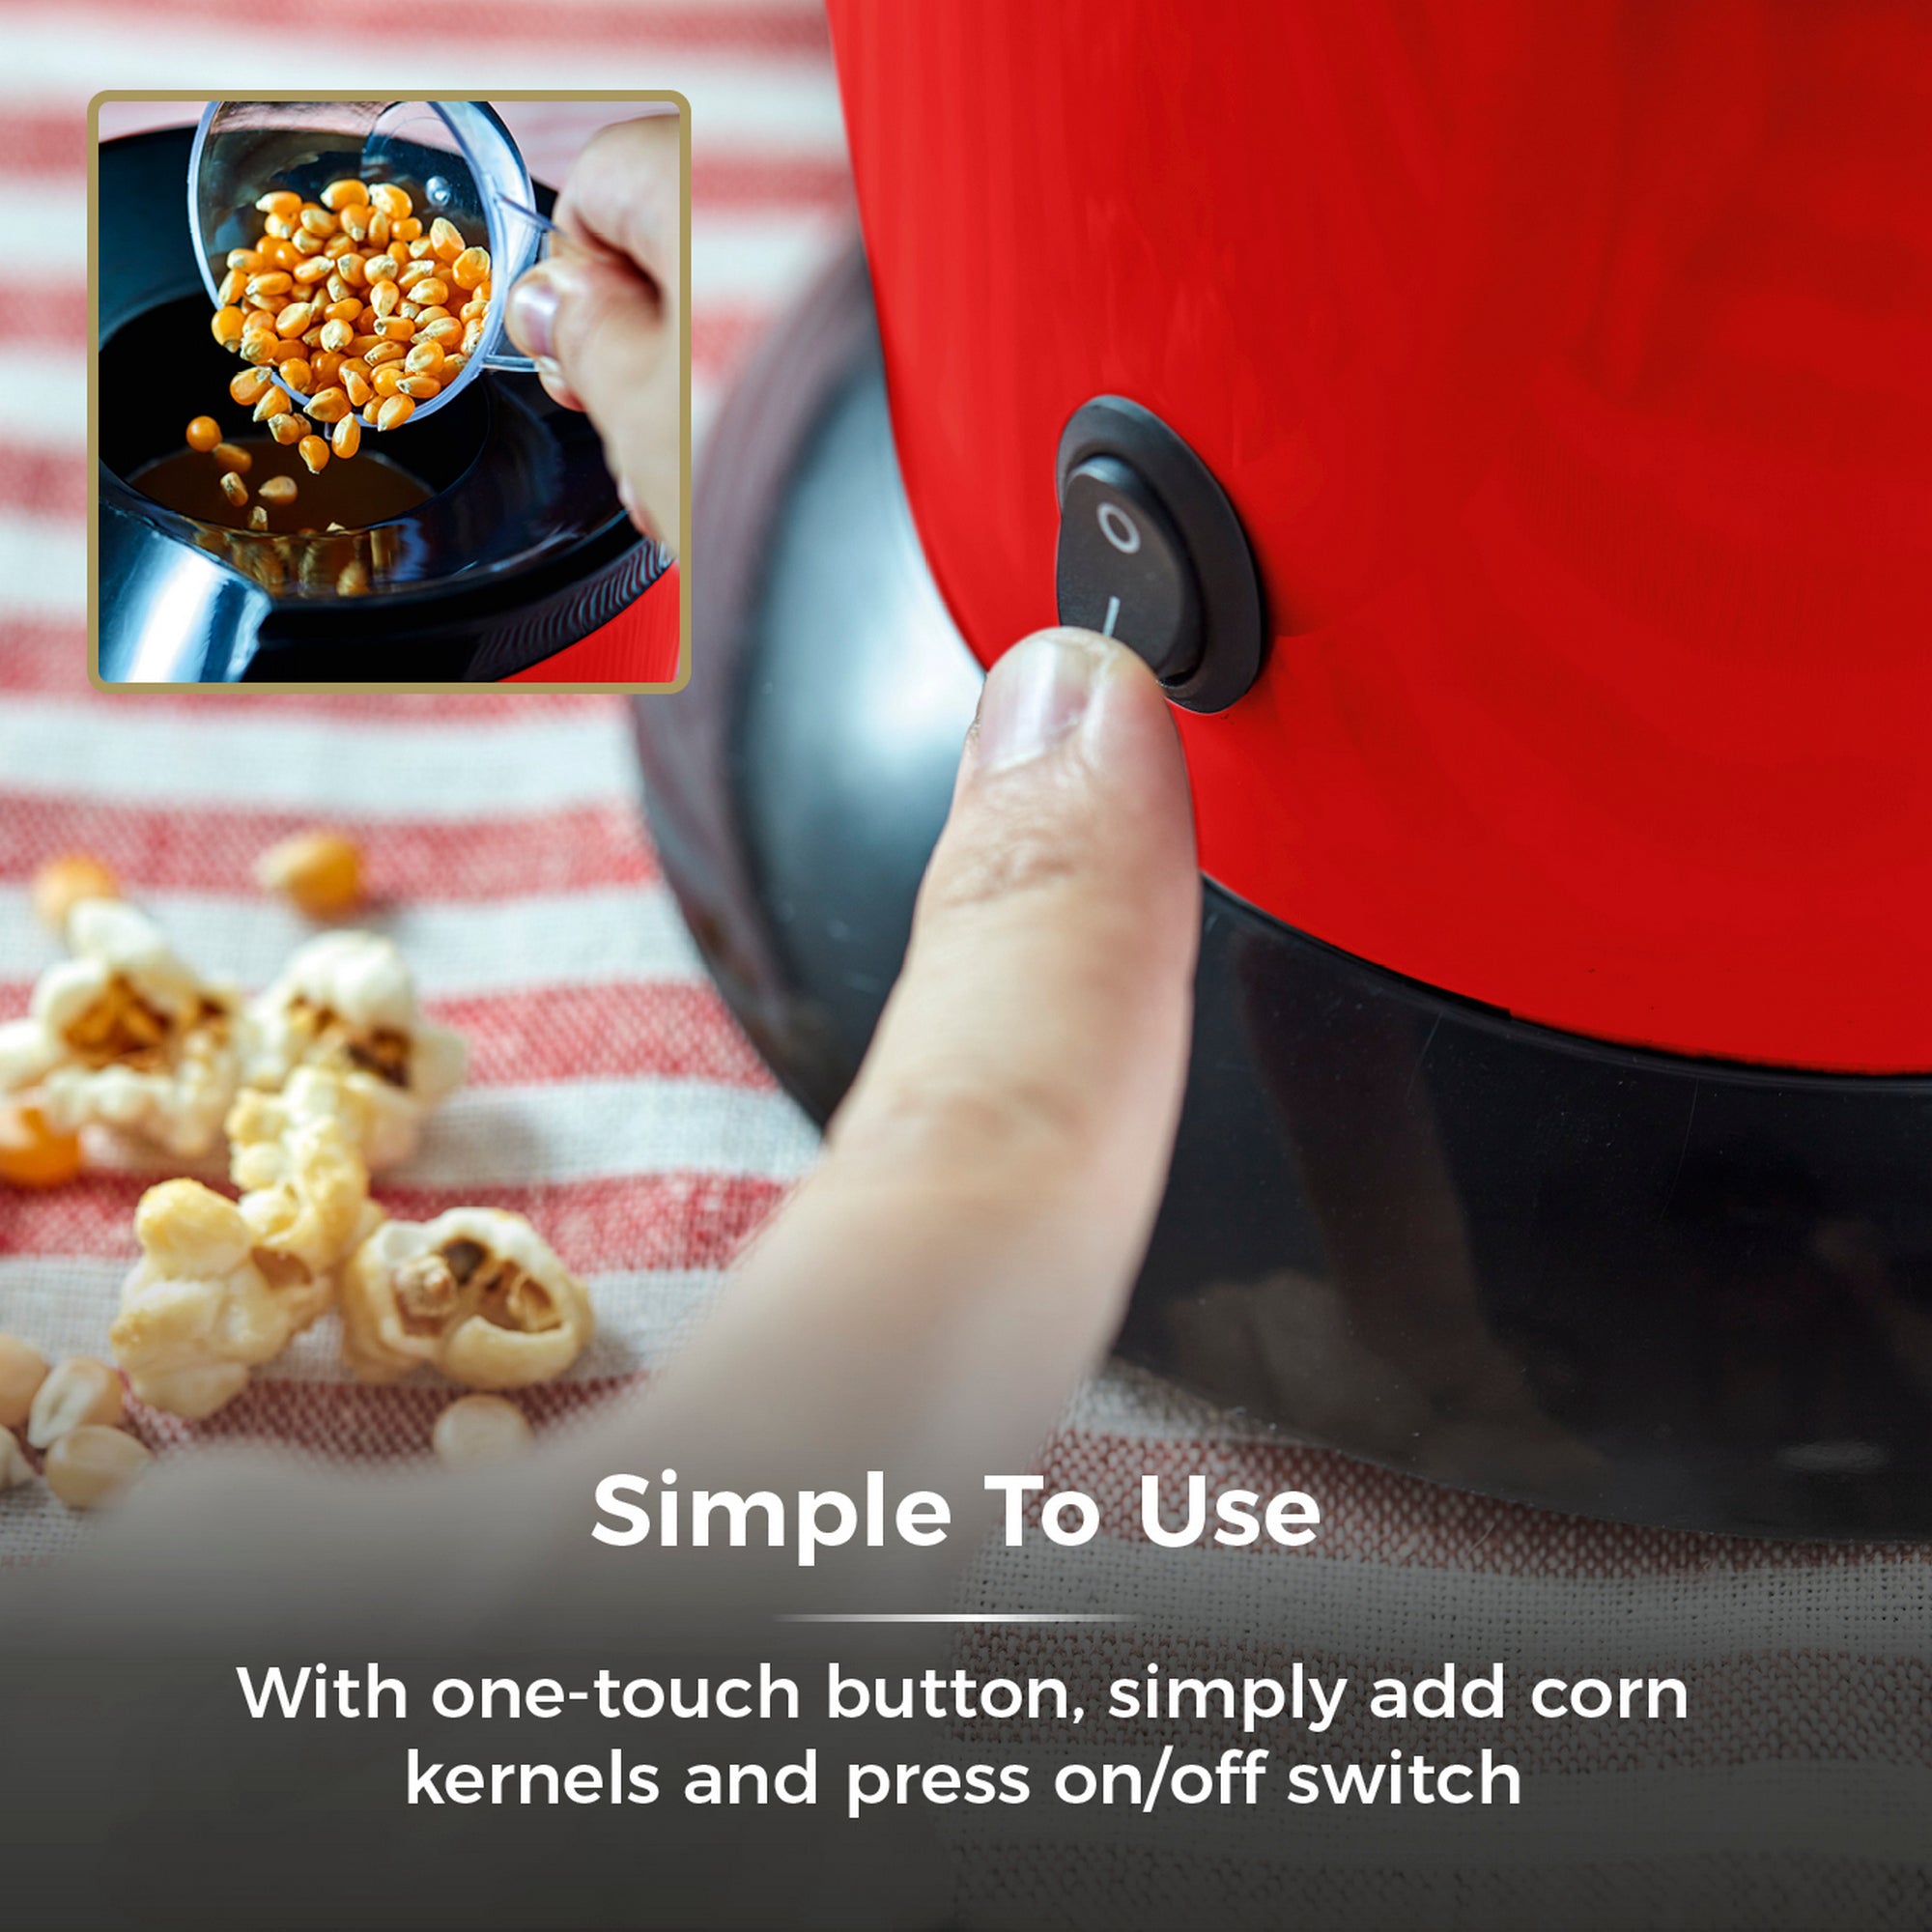 Tower 1200W Popcorn Maker Features 6